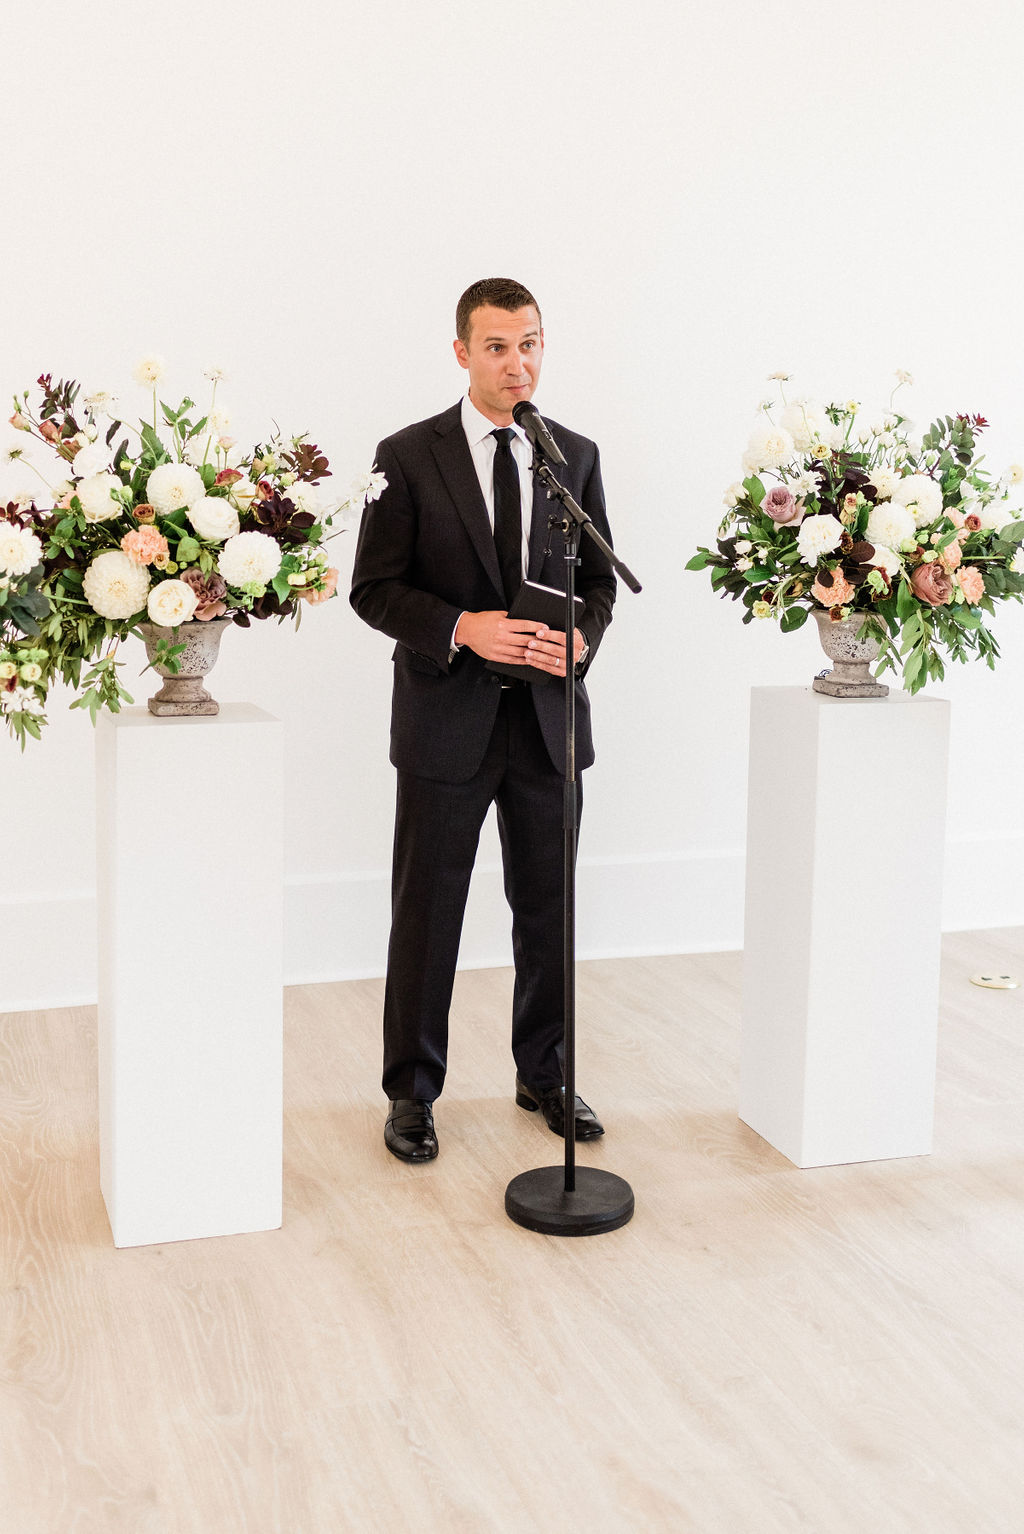 Officiant preforming a ceremony during a Kalamazoo, Michigan wedding